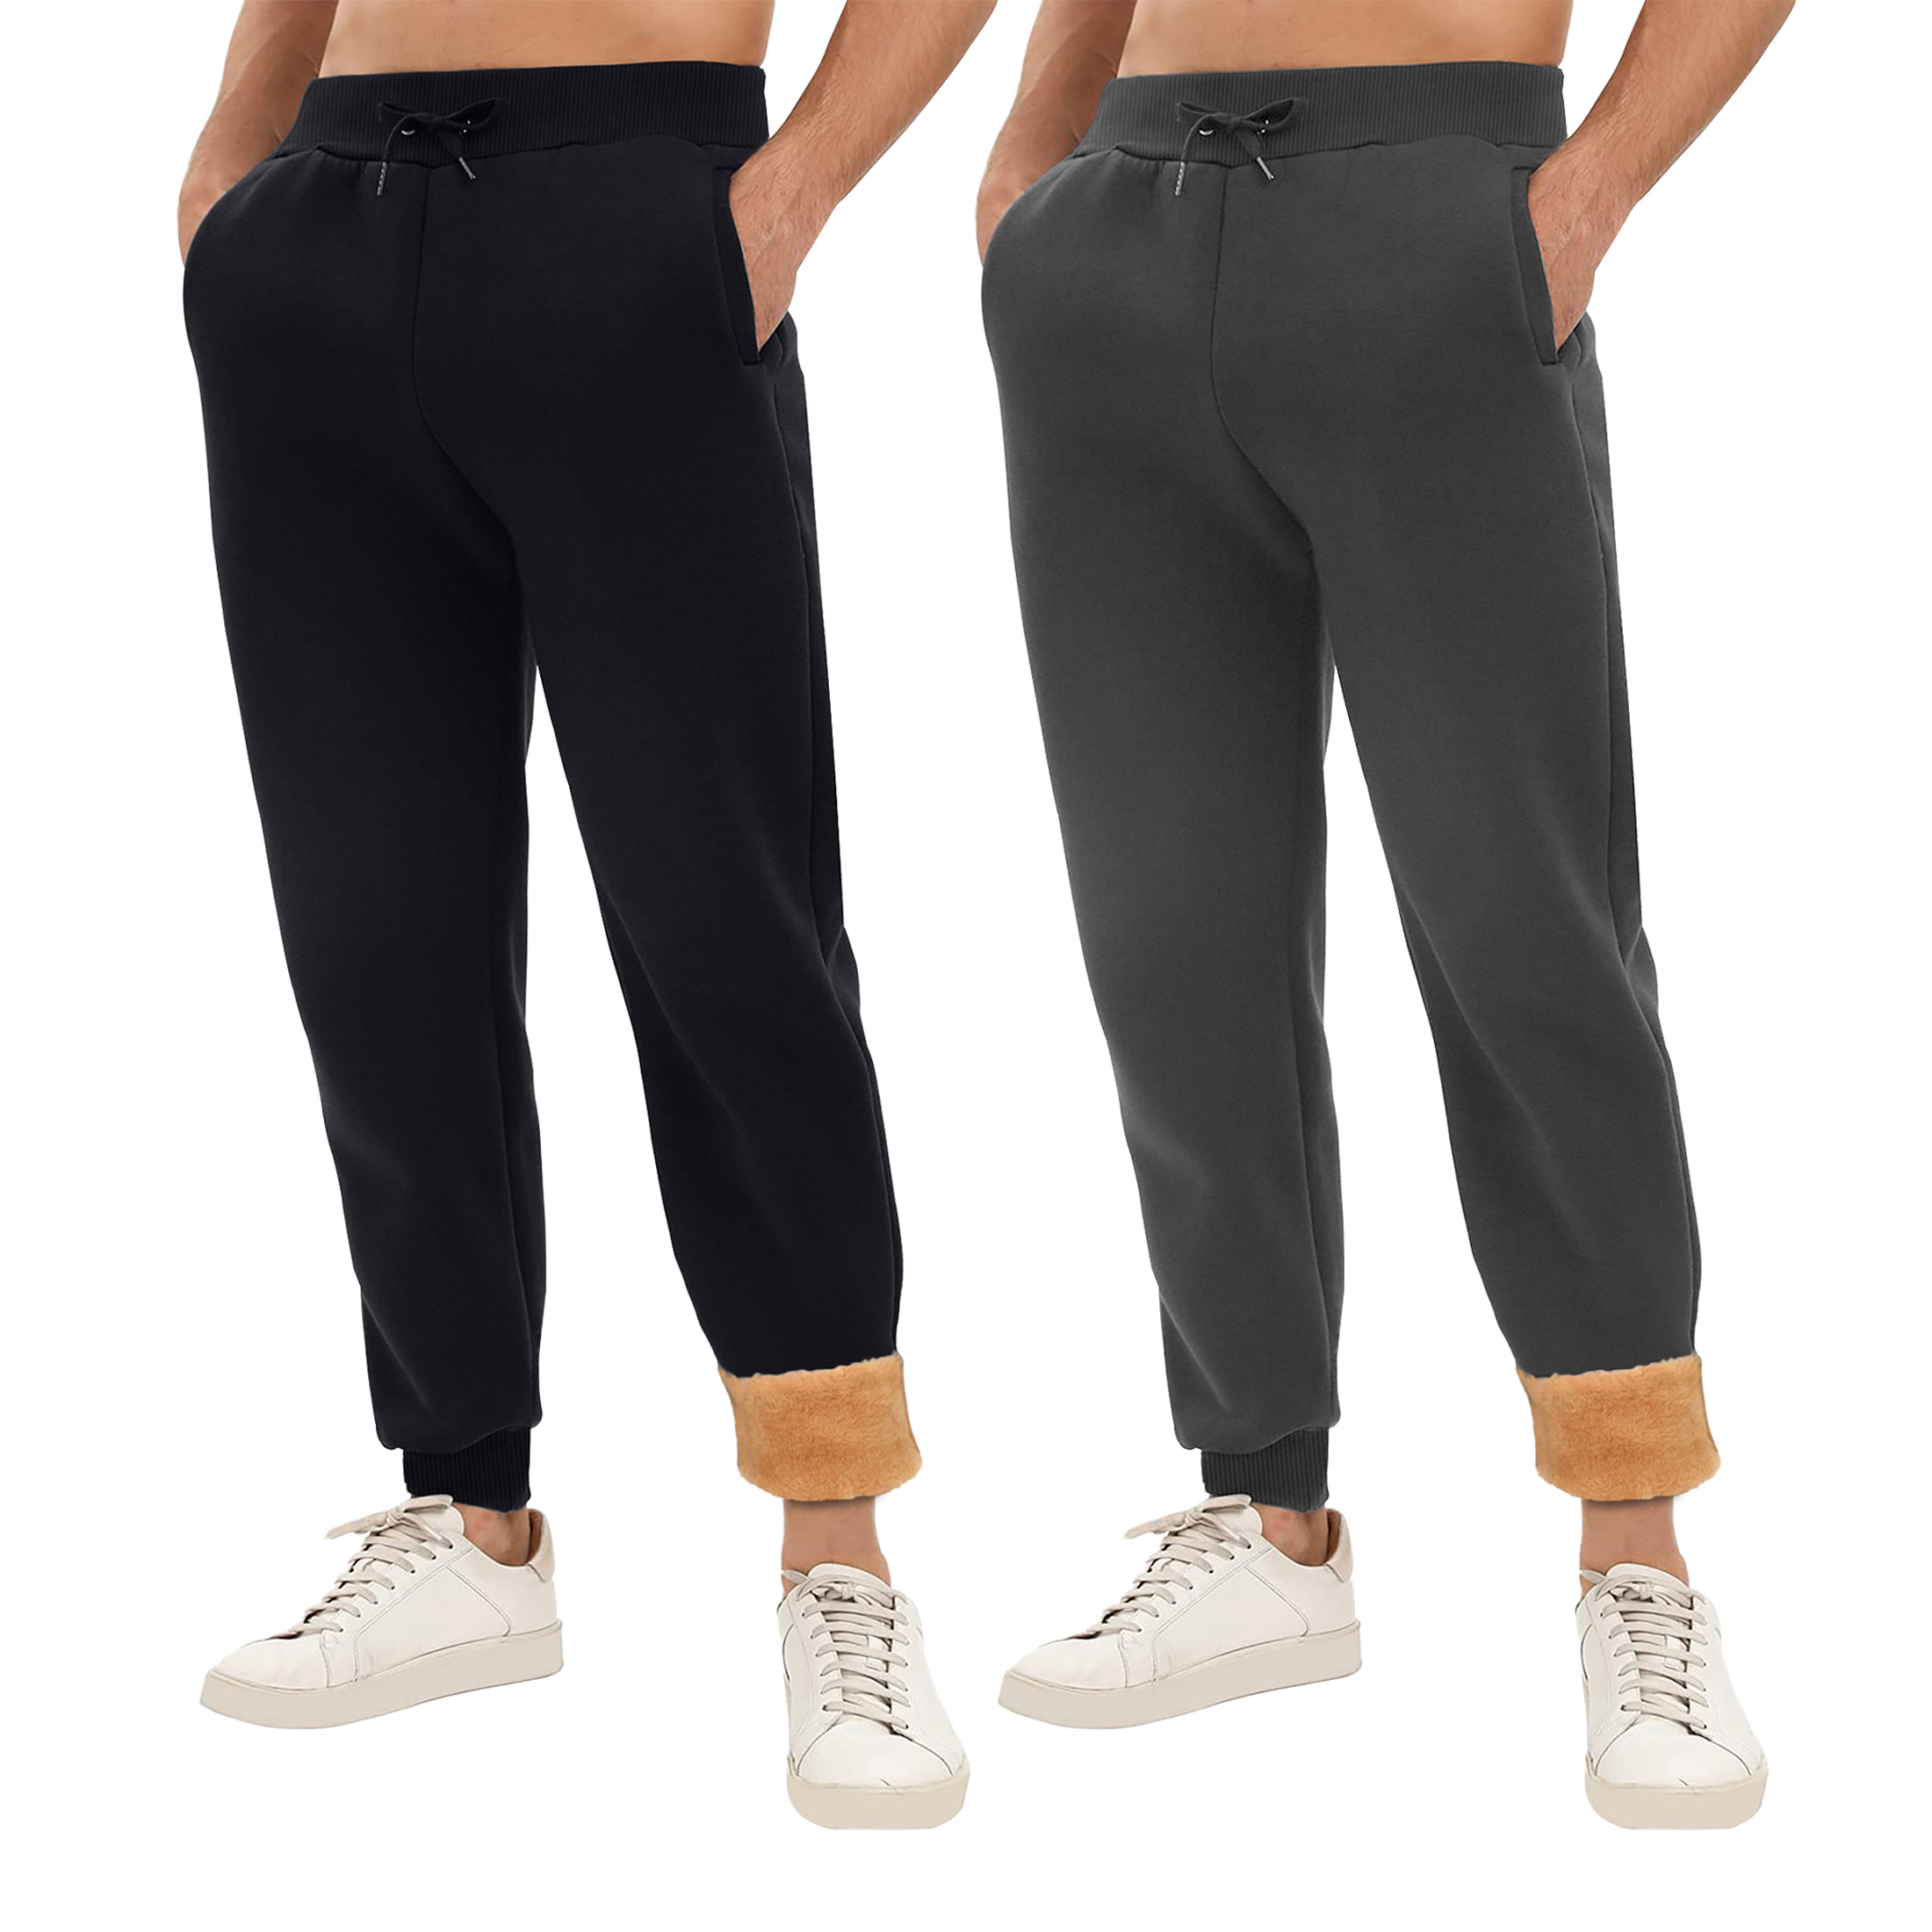 2-Pack: Men's Winter Warm Thick Sherpa Lined Jogger Track Pants With Pockets - Black & Charcoal, Small